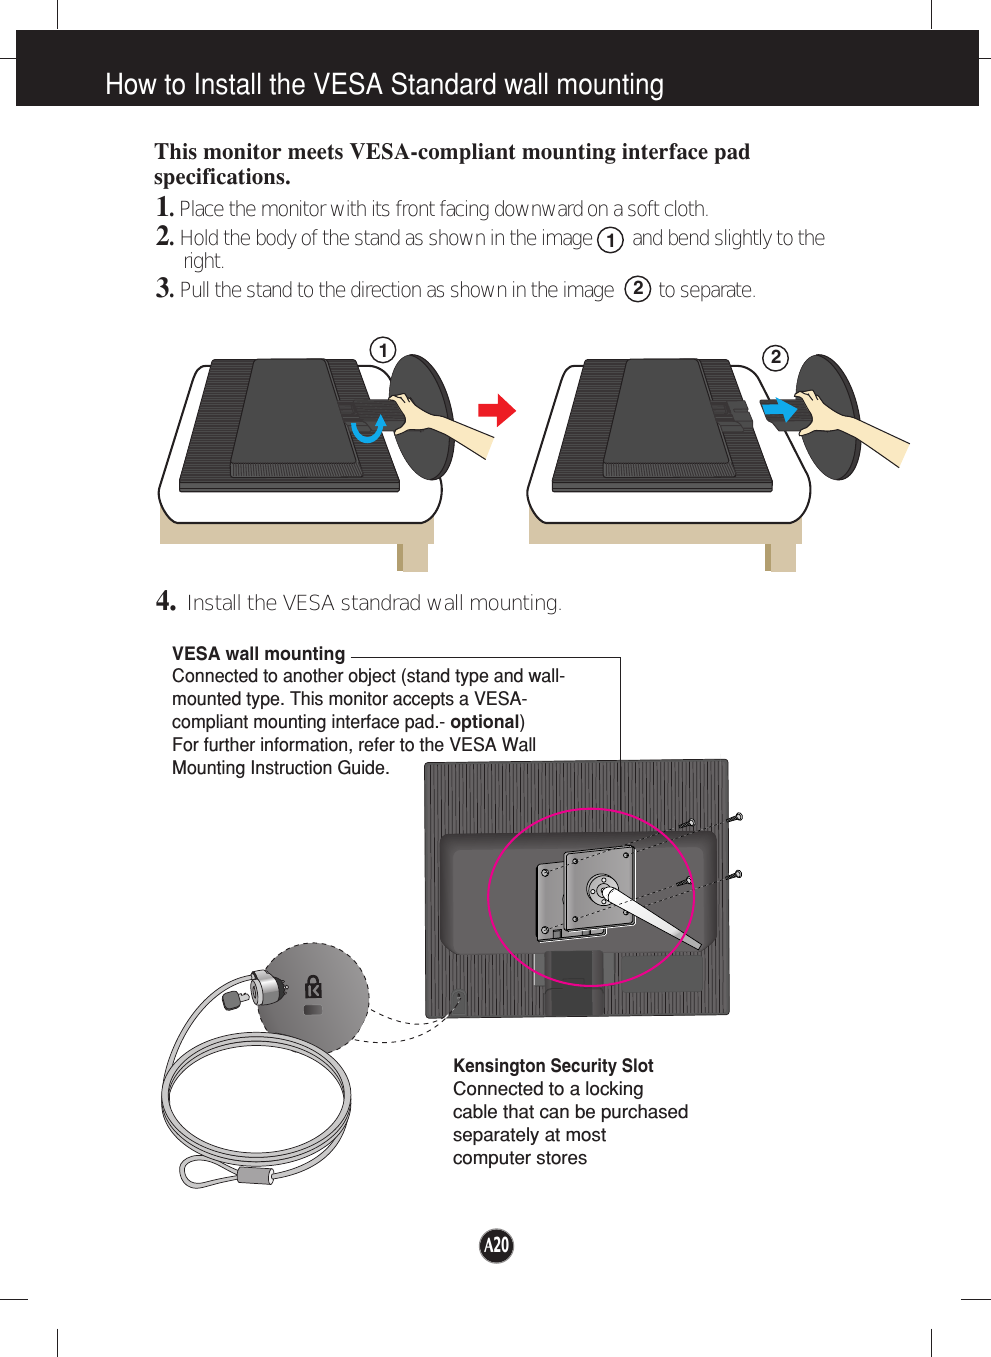 How to Install the VESA Standard wall mountingVESA wall mountingConnected to another object (stand type and wall-mounted type. This monitor accepts a VESA-compliant mounting interface pad.- optional)For further information, refer to the VESA WallMounting Instruction Guide.Kensington Security SlotConnected to a locking cable that can be purchasedseparately at most computer storesThis monitor meets VESA-compliant mounting interface padspecifications.1. Place the monitor with its front facing downward on a soft cloth.2.Hold the body of the stand as shown in the image        and bend slightly to theright.3.Pull the stand to the direction as shown in the image         to separate.4.Install the VESA standrad wall mounting.REARREARFRONTFRONTREARREARREARFRONTFRONTREAR2211A20